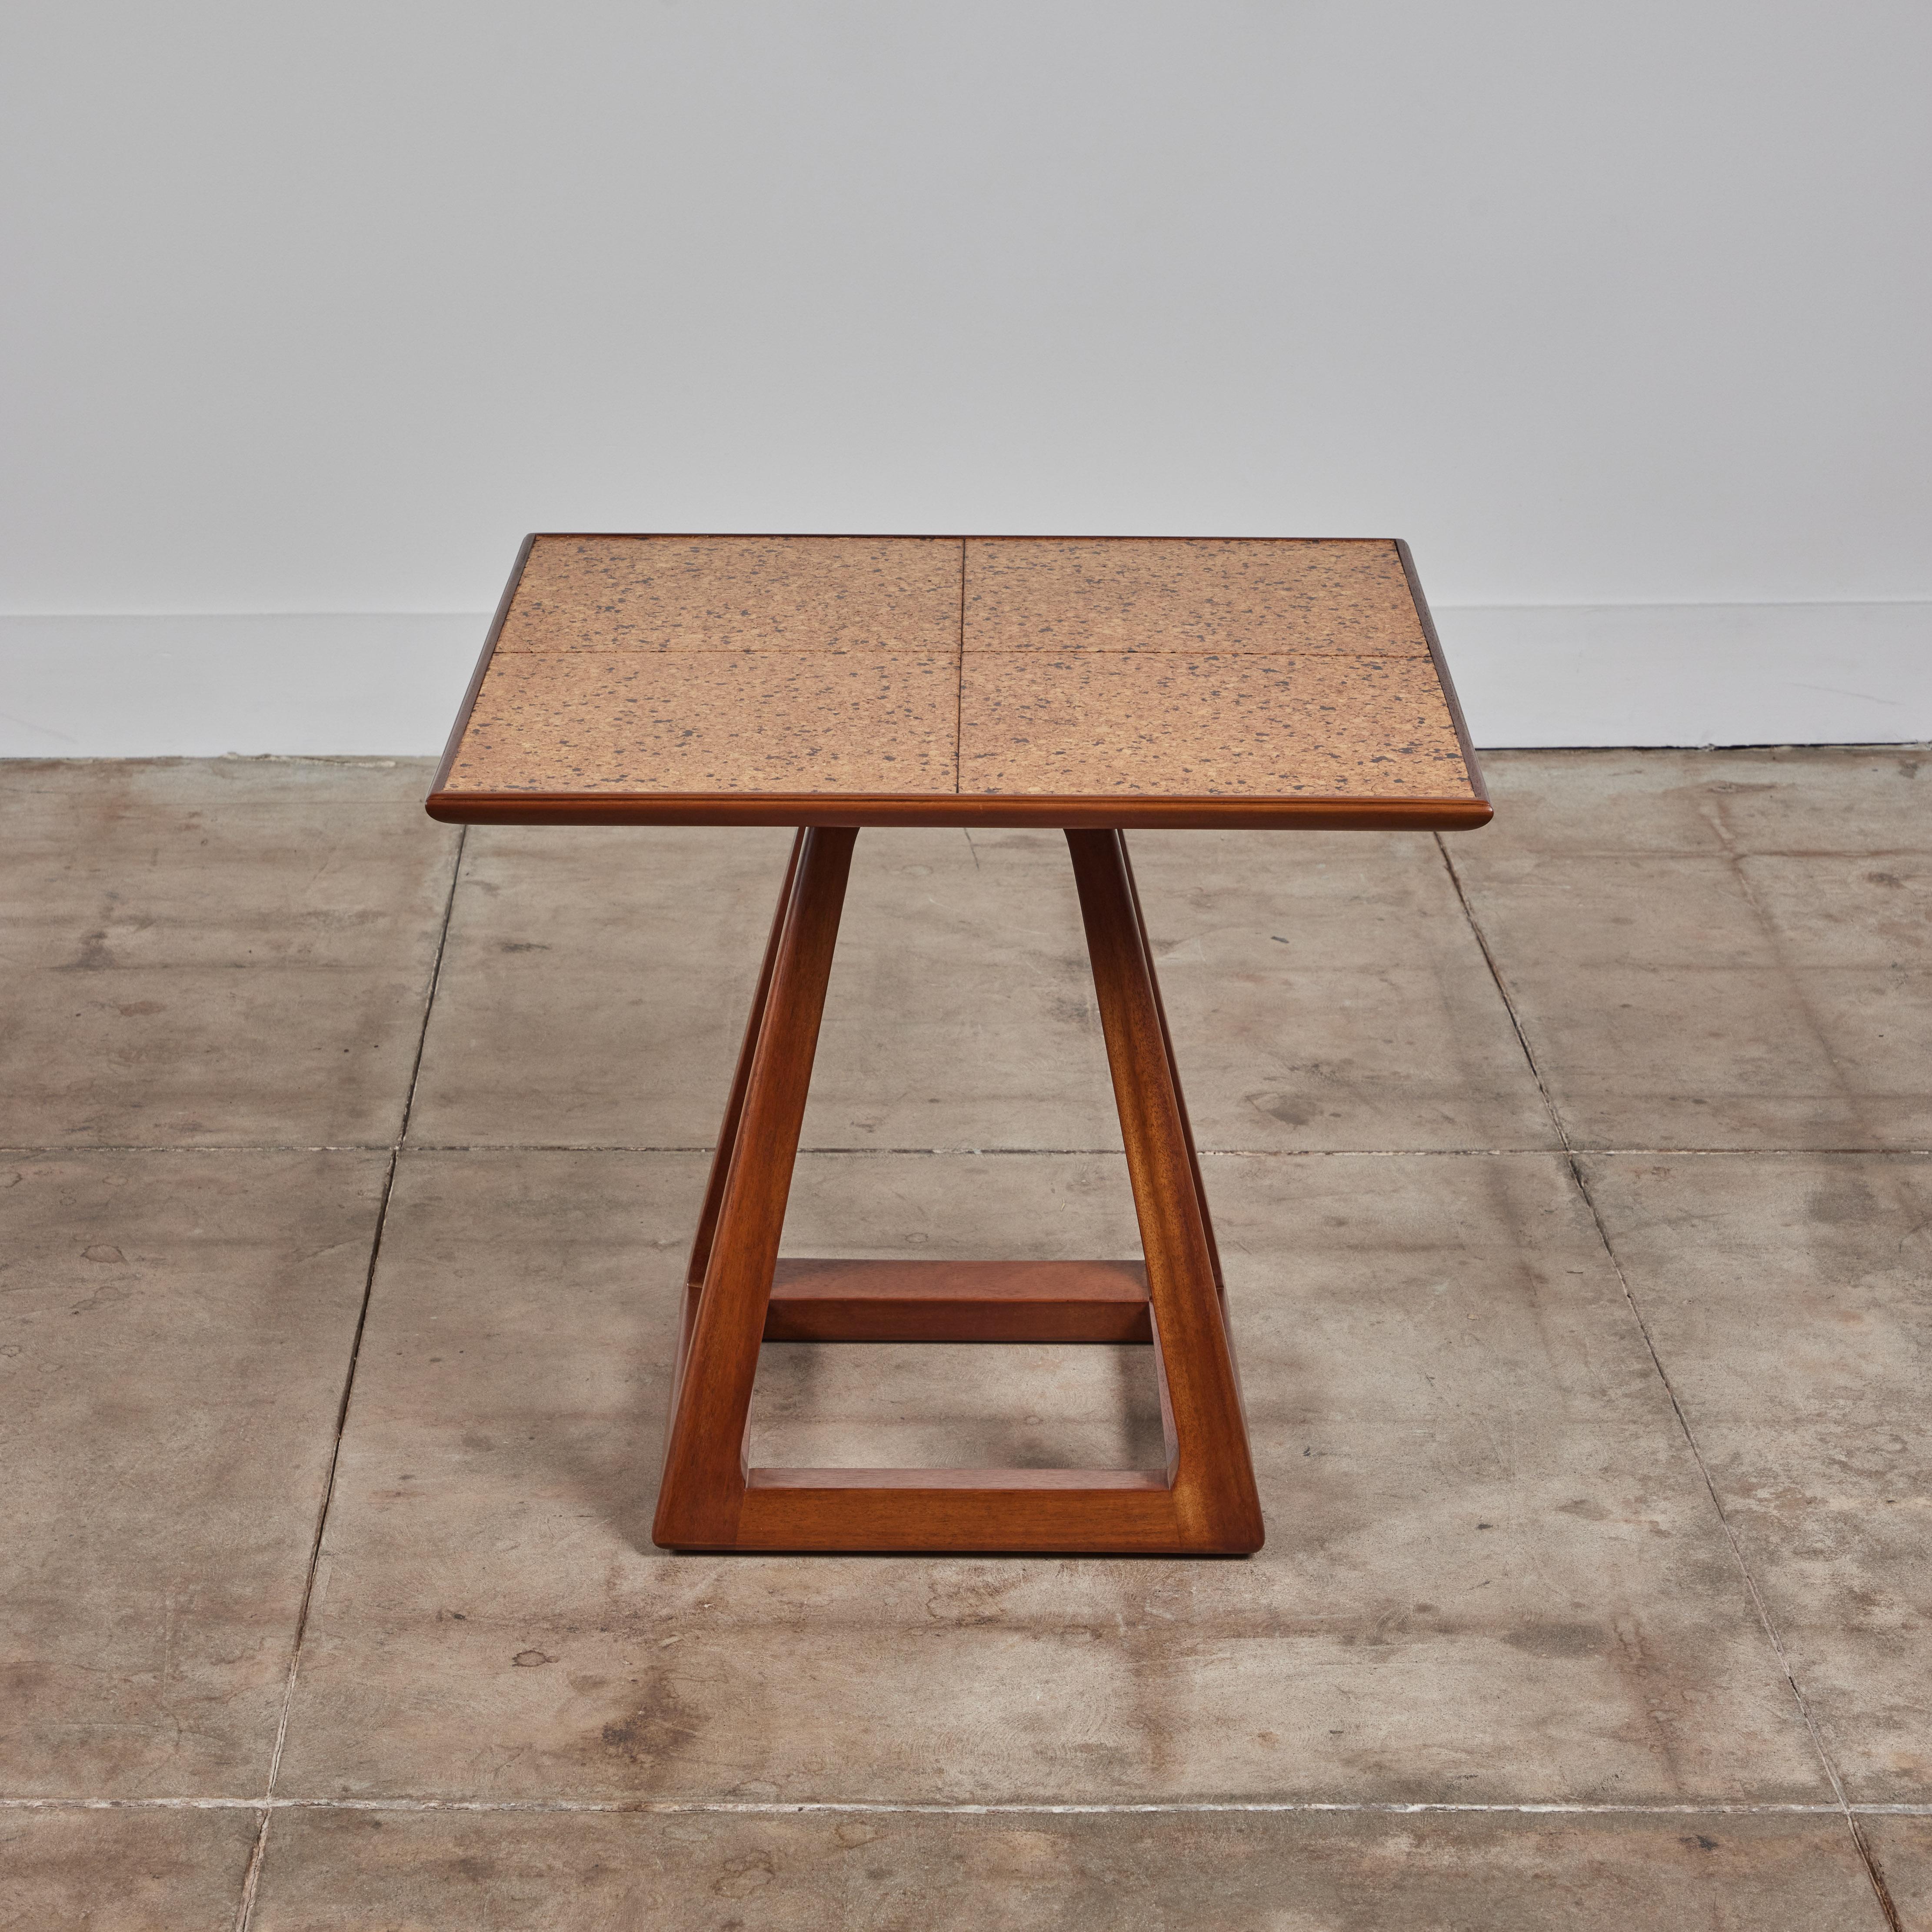 Side table by T.H Robsjohn Gibbings, manufactured by Widdicomb, c.1950s, USA. The mahogany table features a square inlayed cork table top. It is supported by an open square pedestal base. Marked Widdicomb on the underside.

Dimensions
24.75